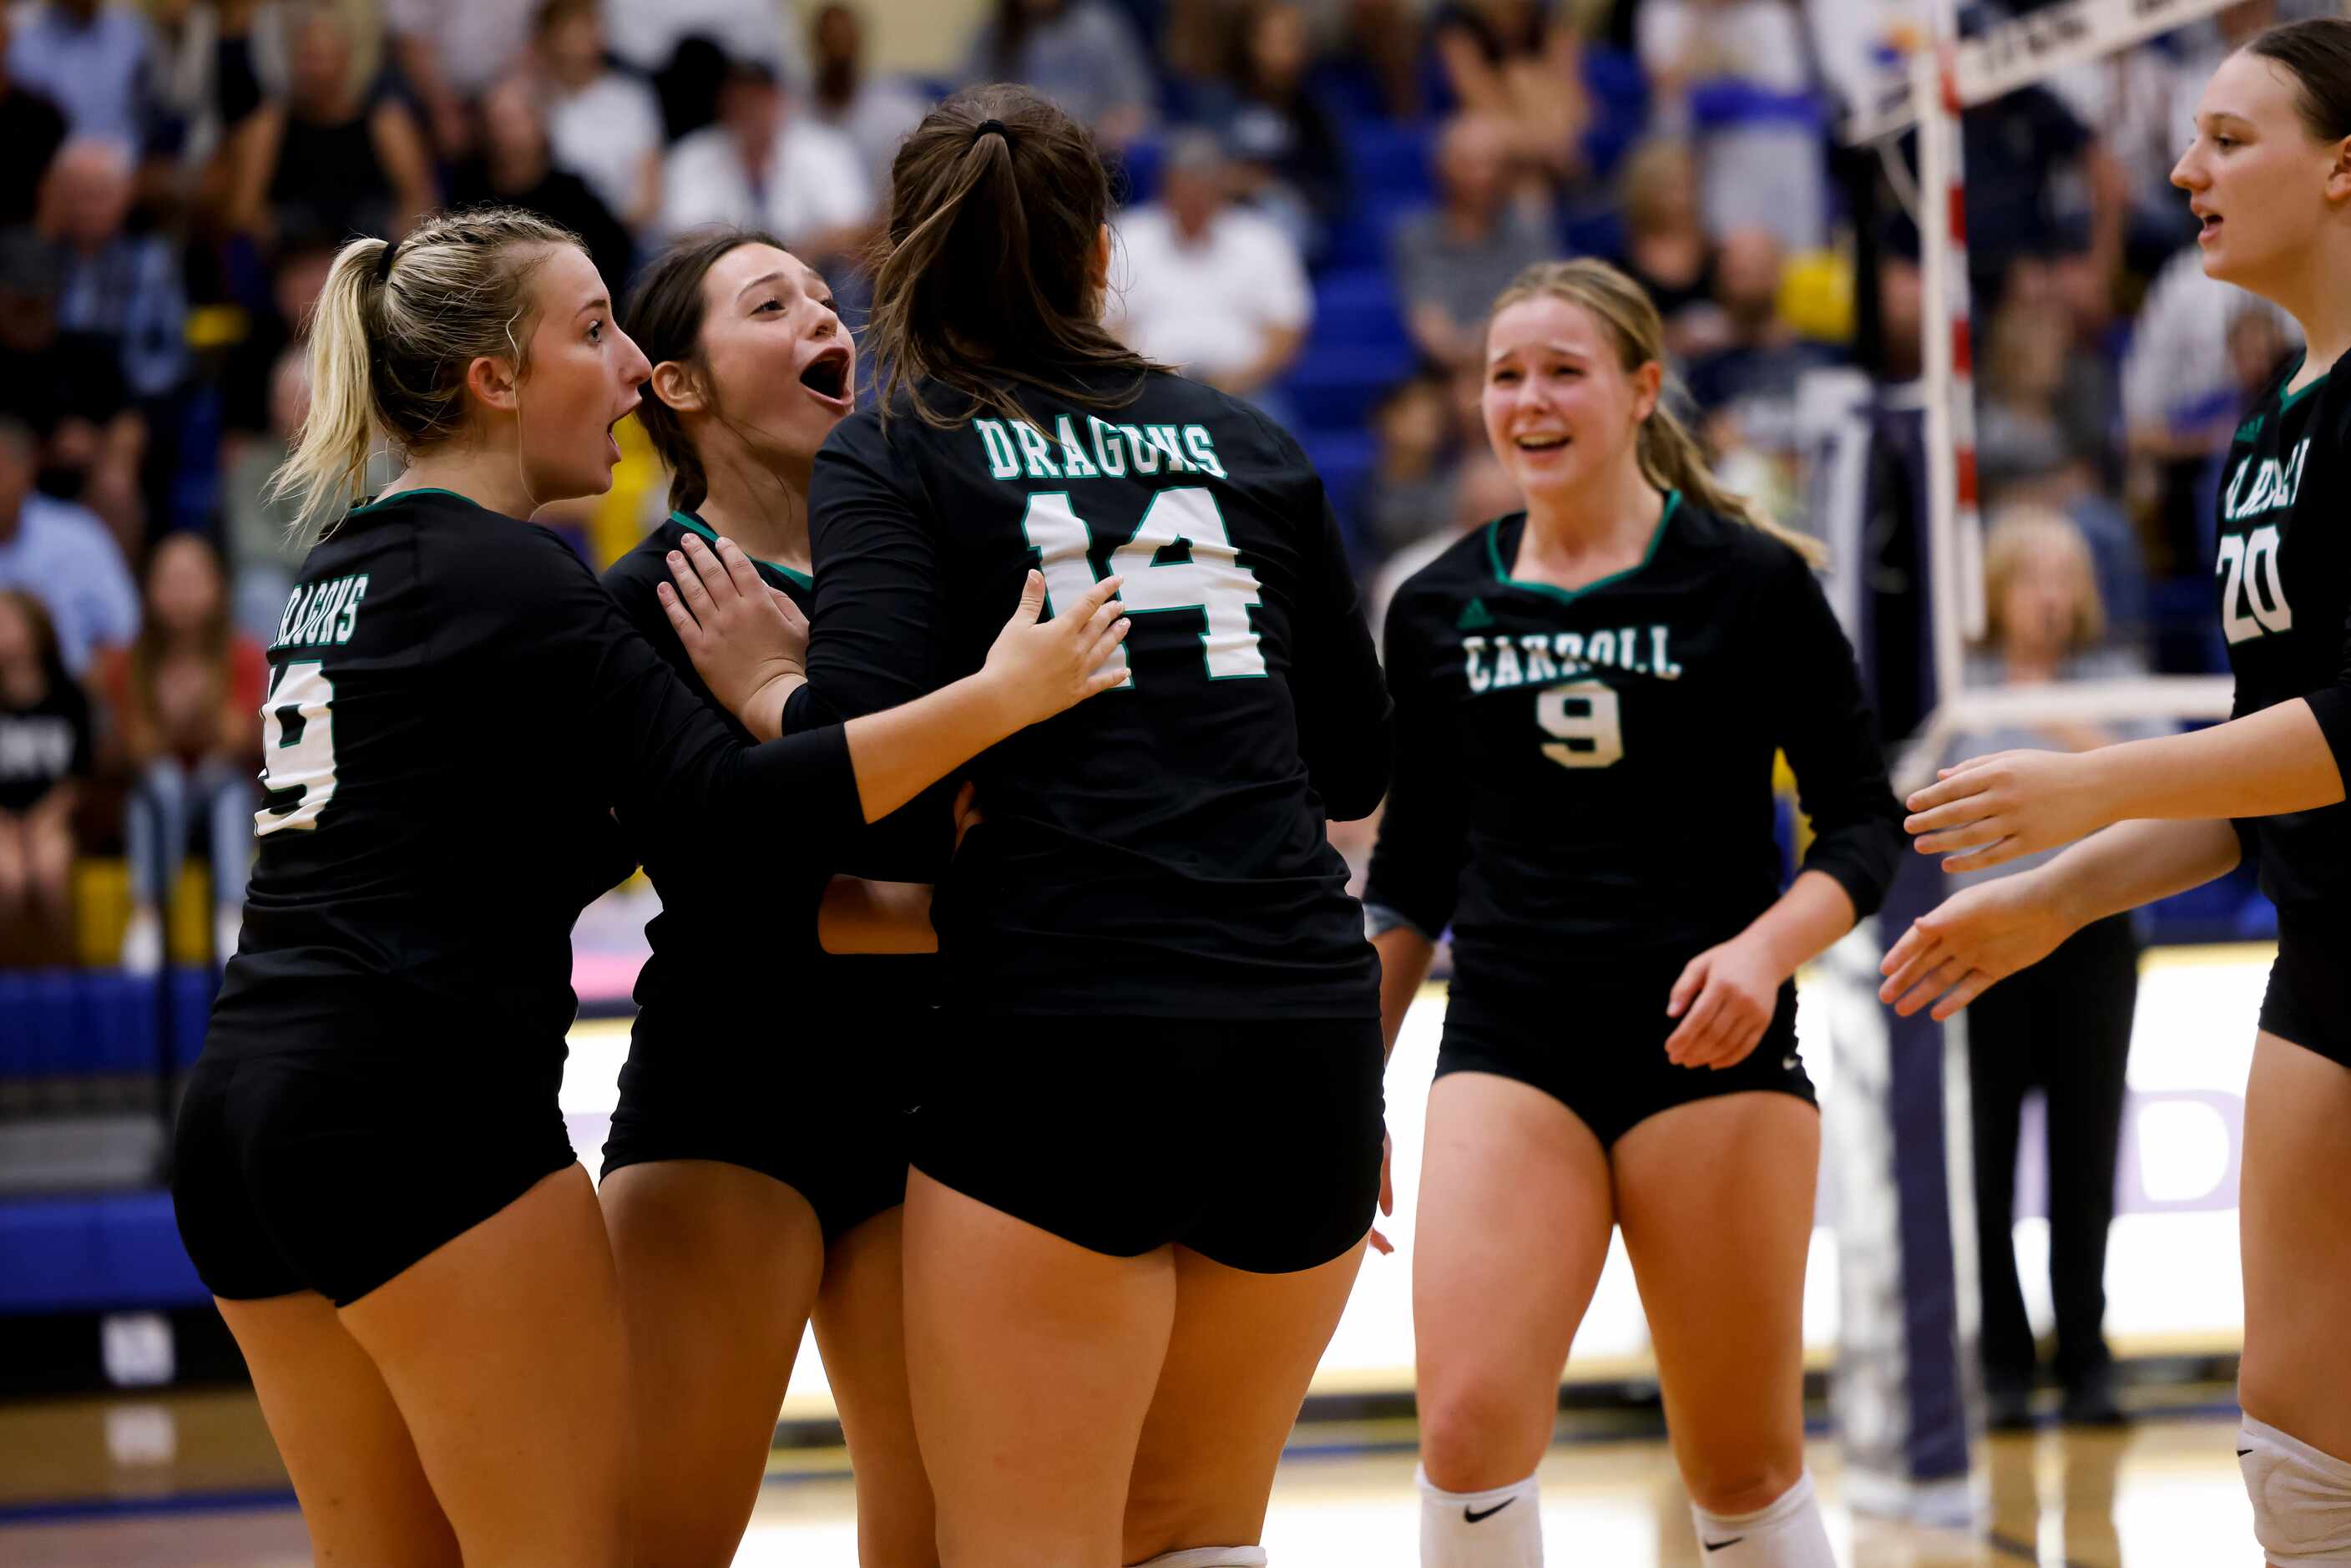 Southlake Carroll celebrates defeating Keller during the fourth and final set of a 4-6A...